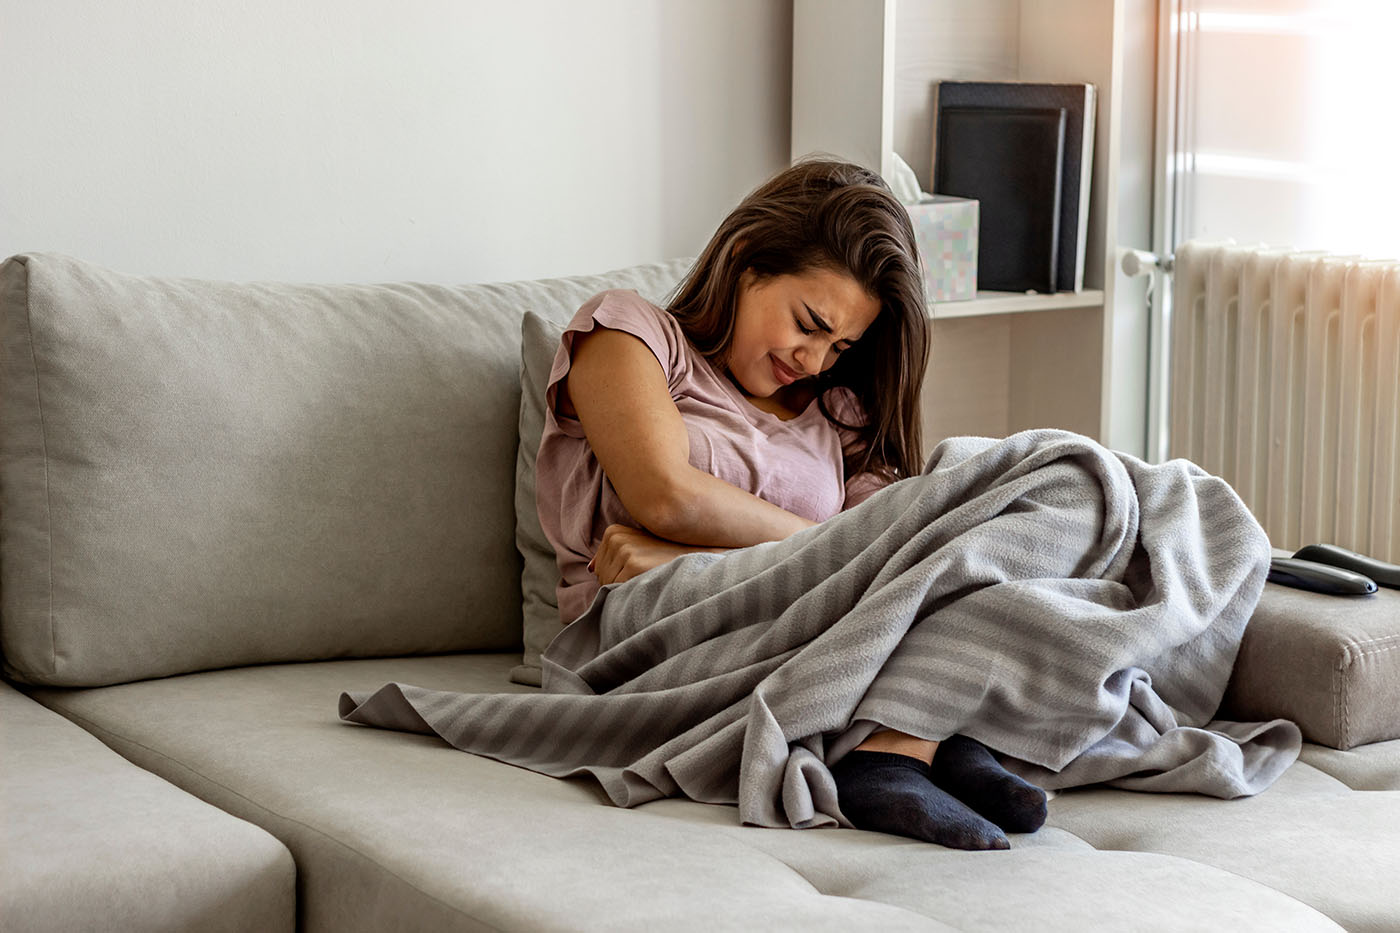 Unhappy woman holding hands on stomach suffering from abdominal pain with eyes closed. Women having menstrual period, food poisoning, gastritis or diarrhea. Girl feeling unwell sitting in living room.
endométriose une maladie complexe